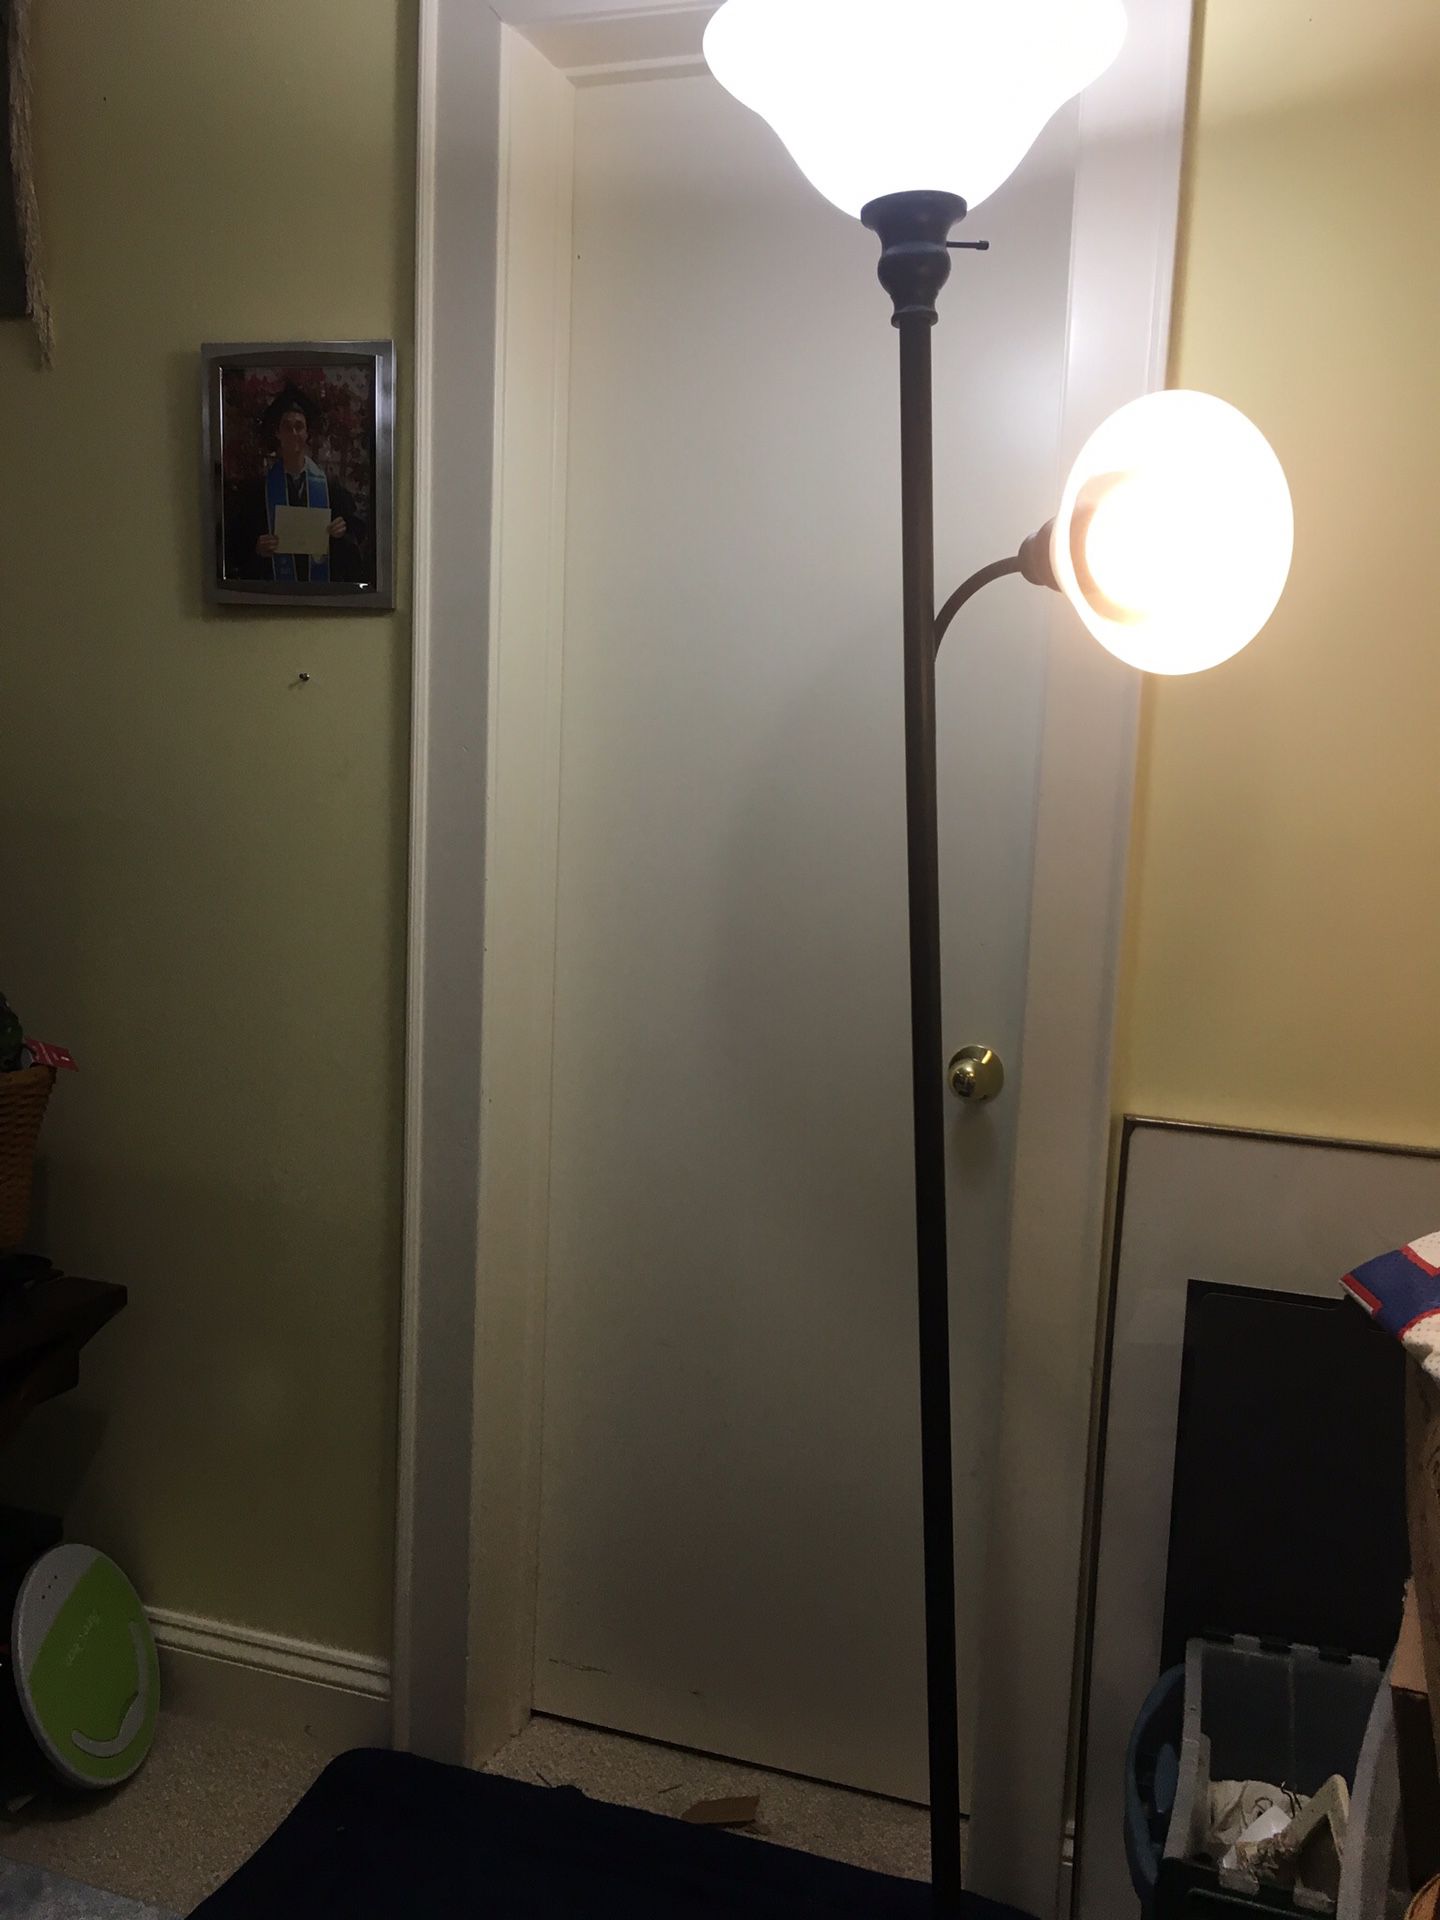 Floor lamps with two lights -1 fixed toward ceiling & other adjustable for tasks.